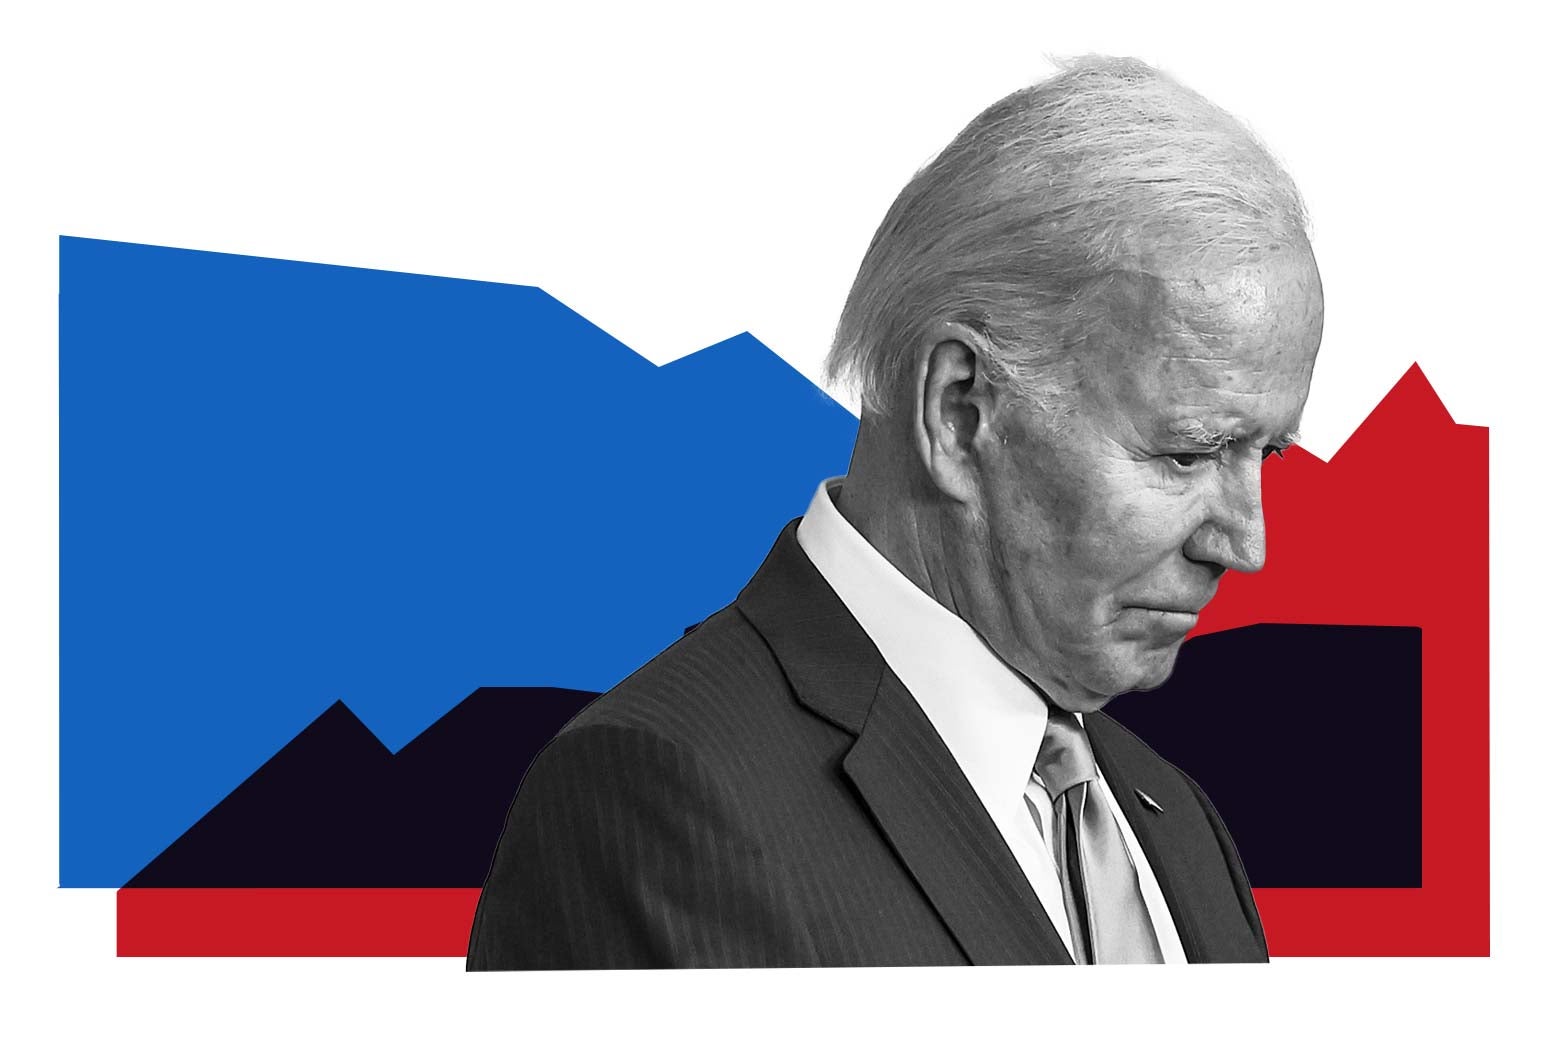 Joe Biden looking down, against a background of overlapping red and blue shapes